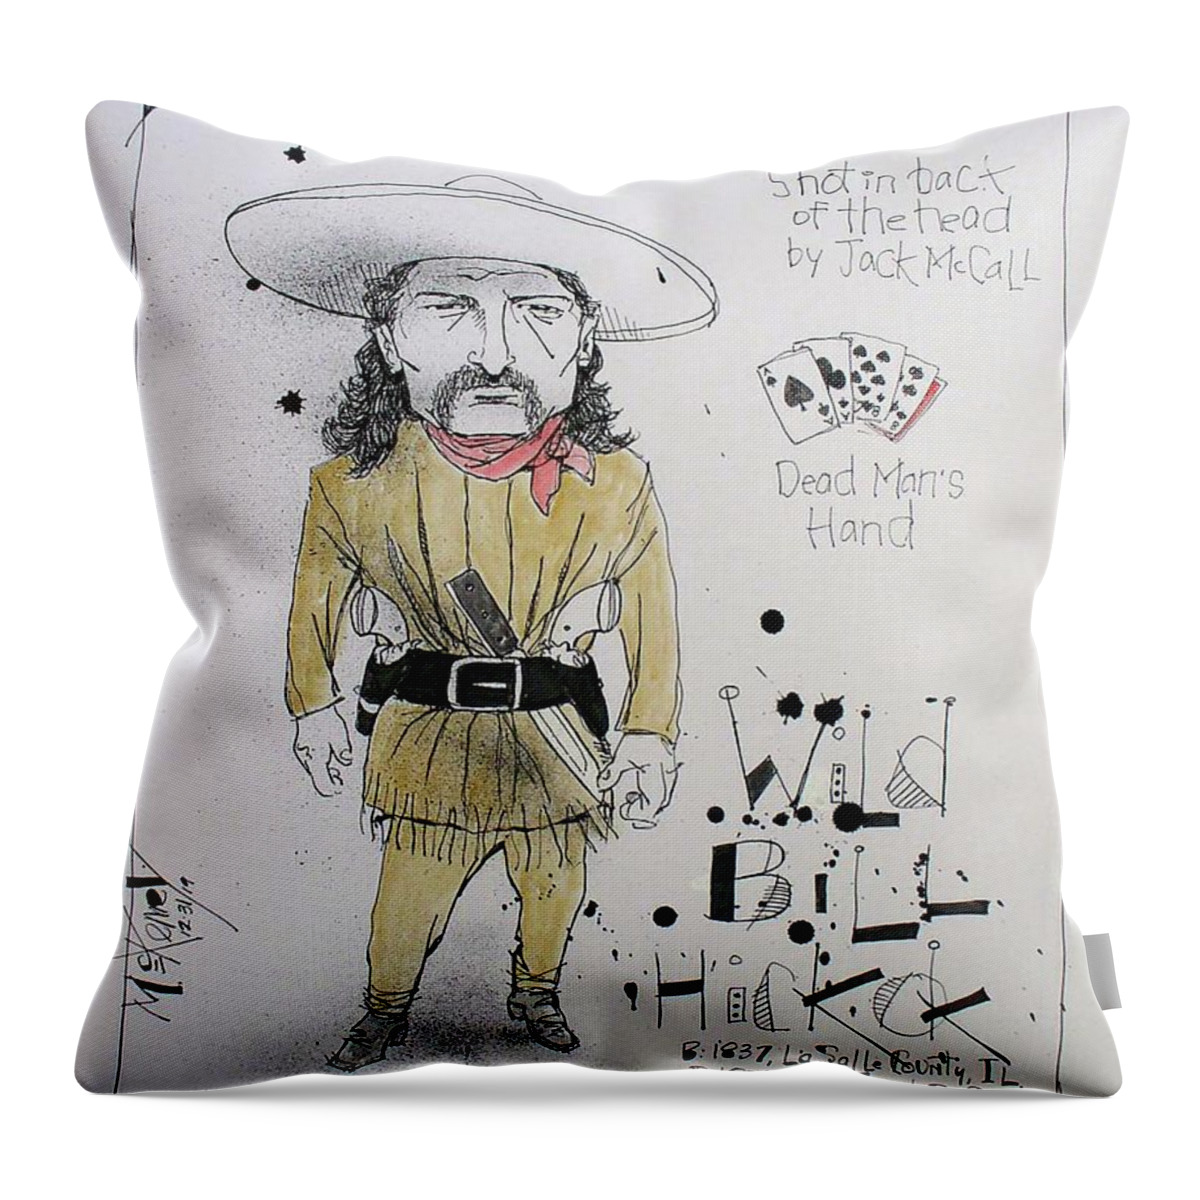  Throw Pillow featuring the drawing Wild Bill Hickok by Phil Mckenney